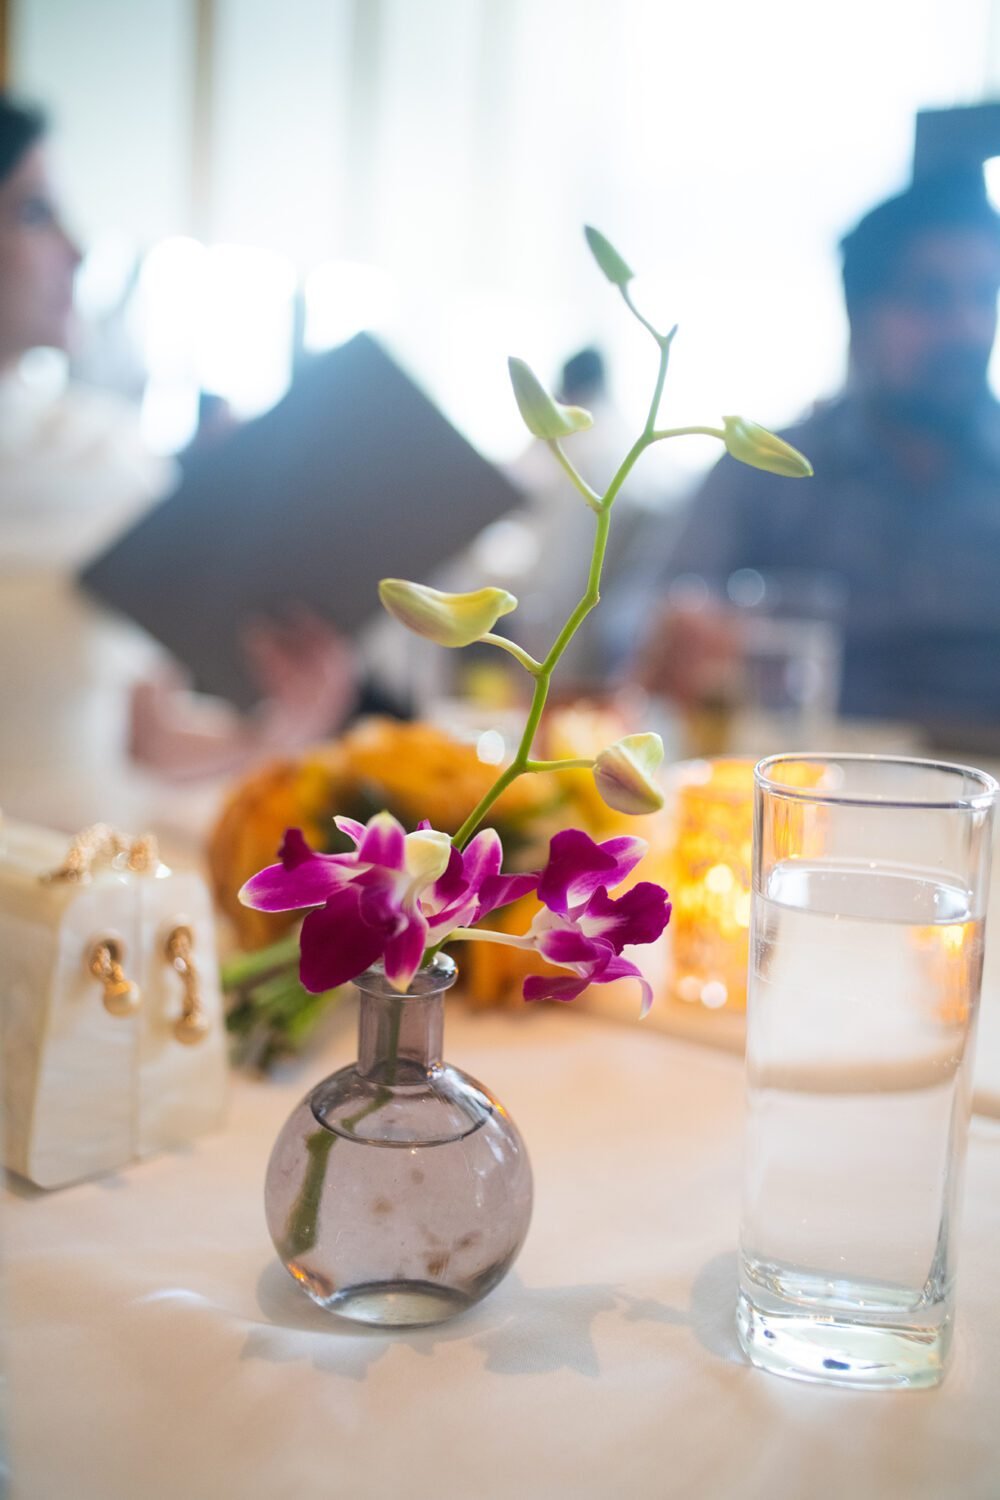 Table orchids. NYC Bangledesh wedding NYC City Hall shot by documentary style wedding photographer Angela Cappetta.